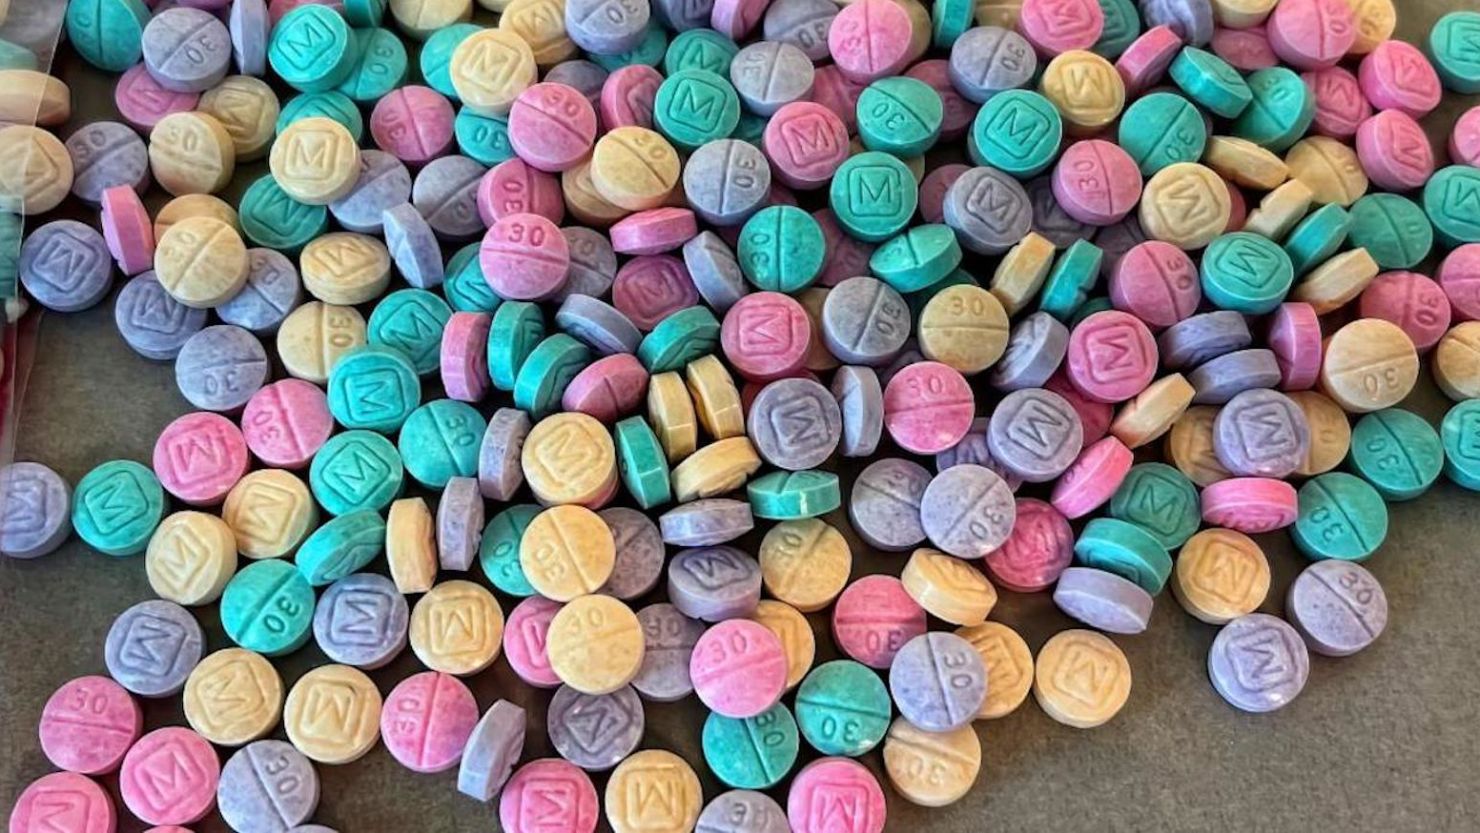 The US Drug Enforcement Administration issued a warning about "brightly-colored fentanyl used to target young Americans."